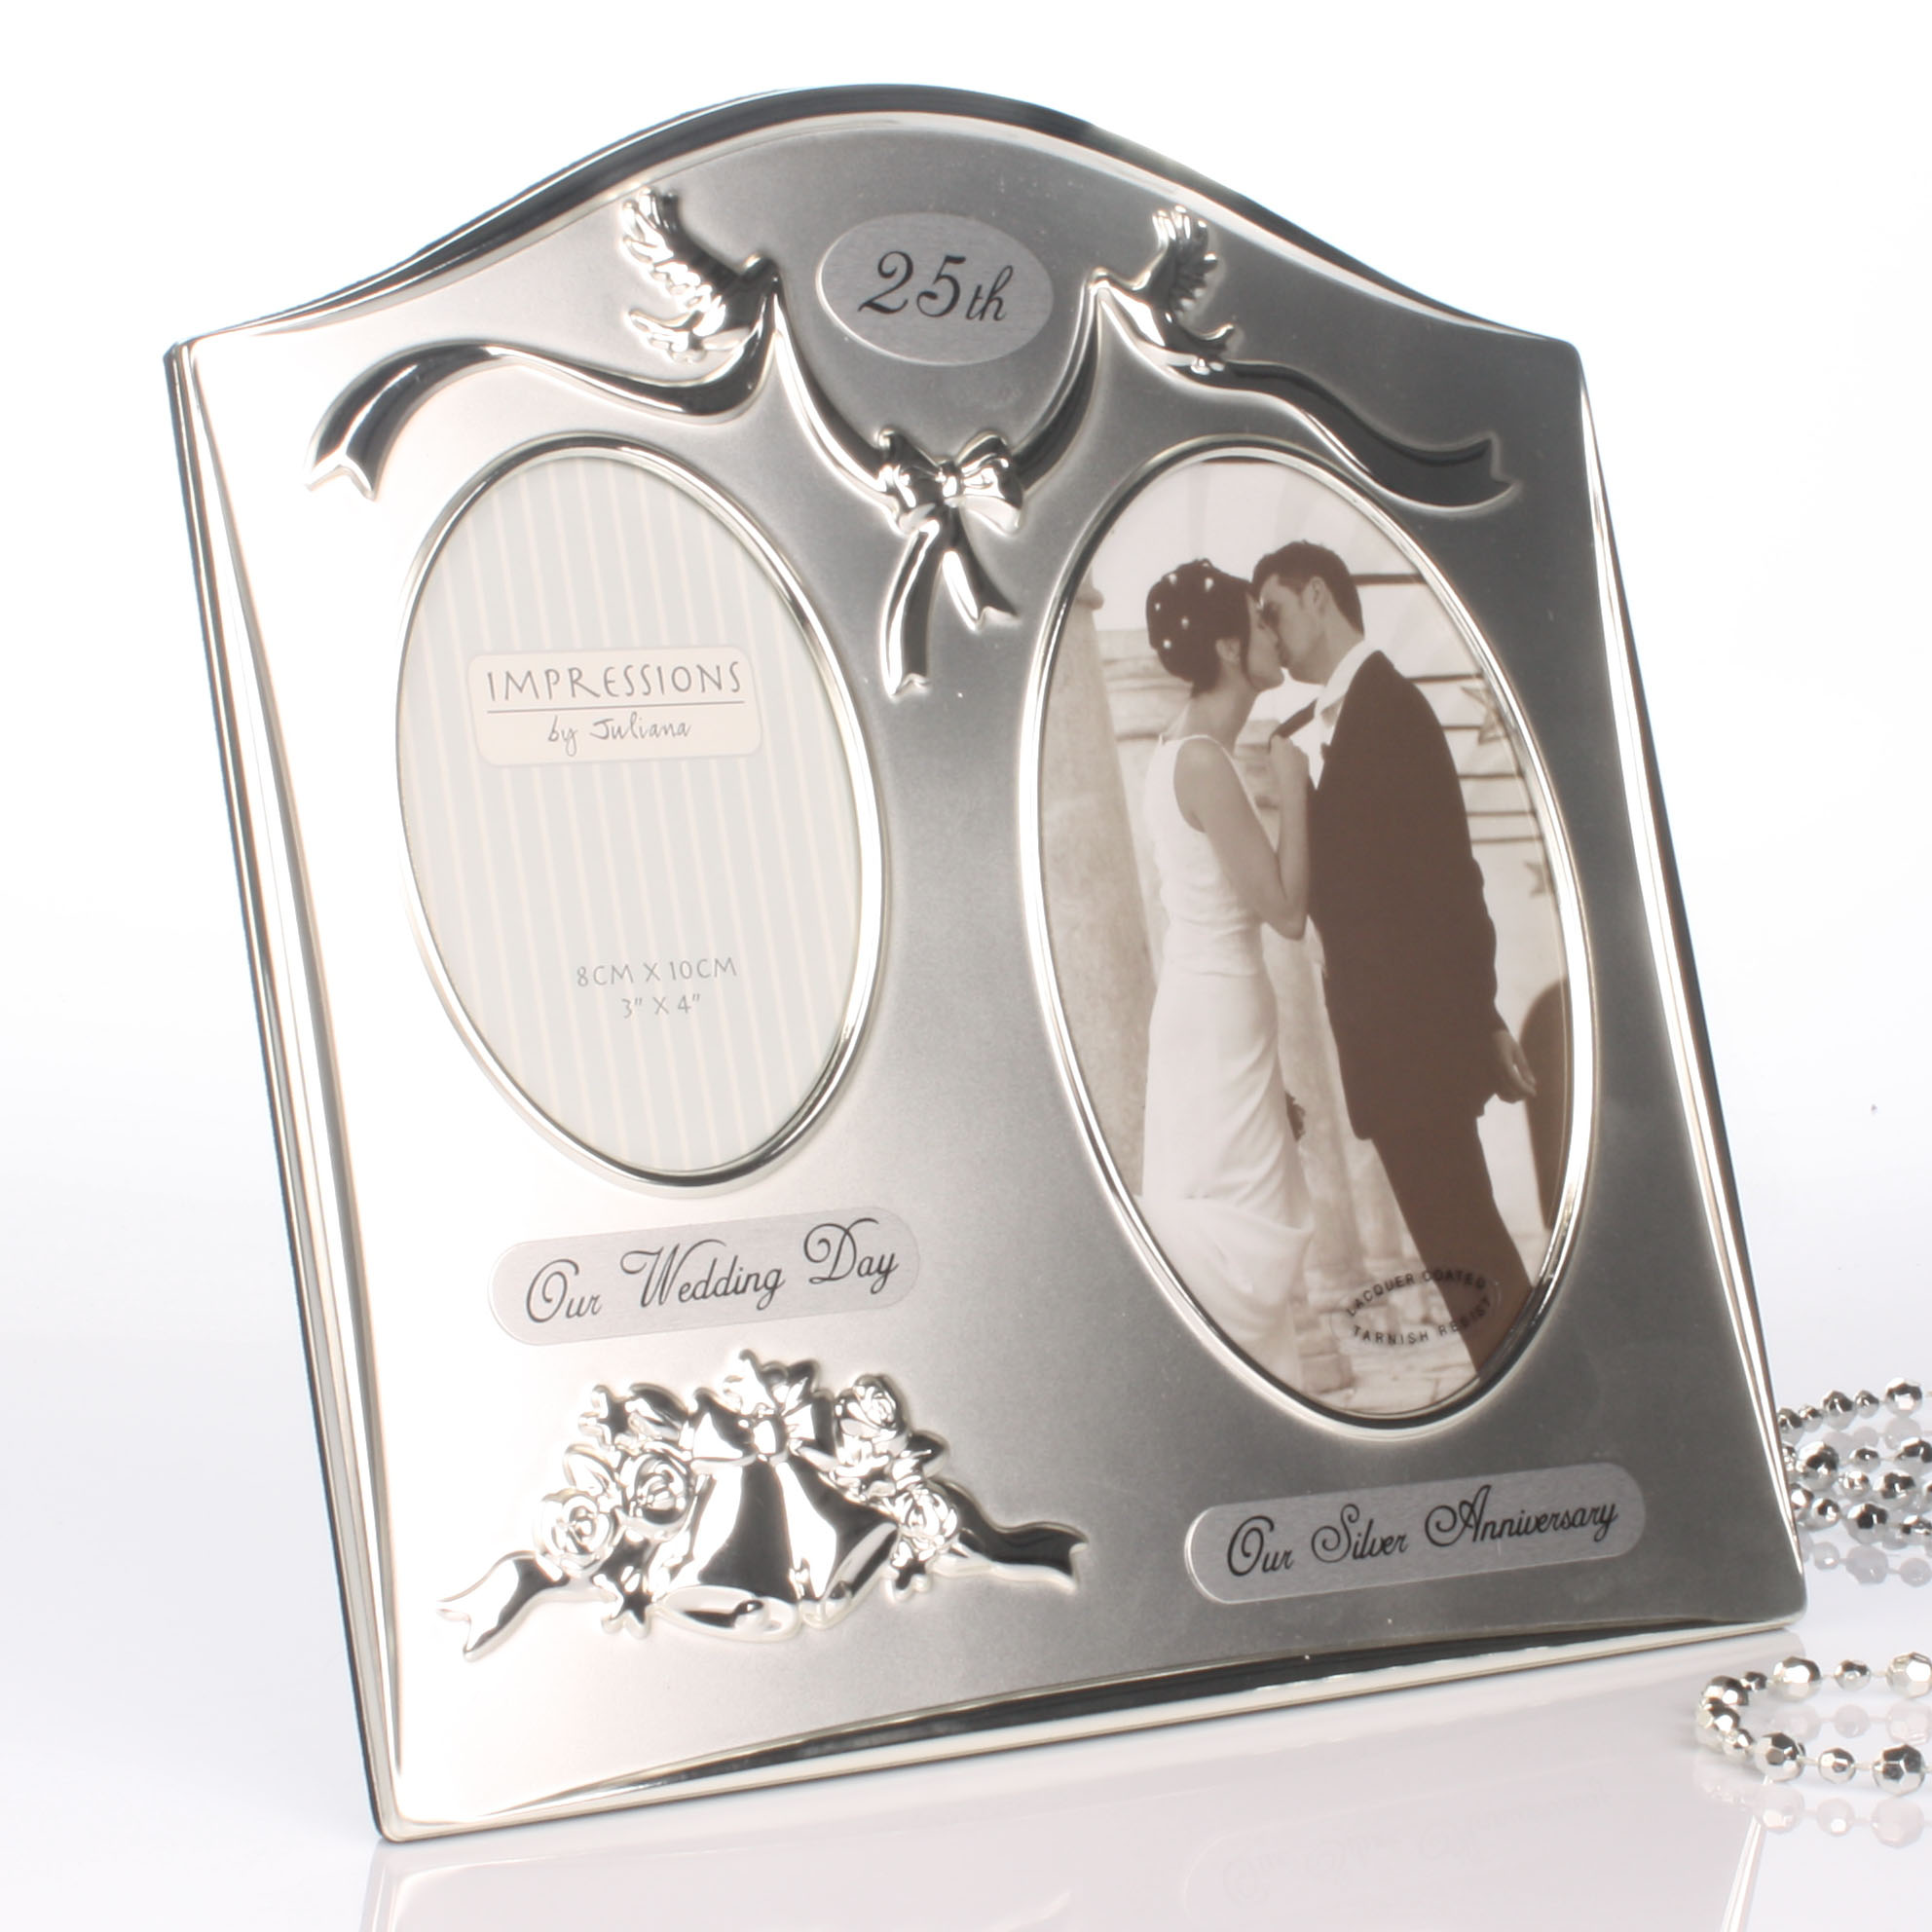 Message silver photo frame new baby christening wedding birthday ideal gift 